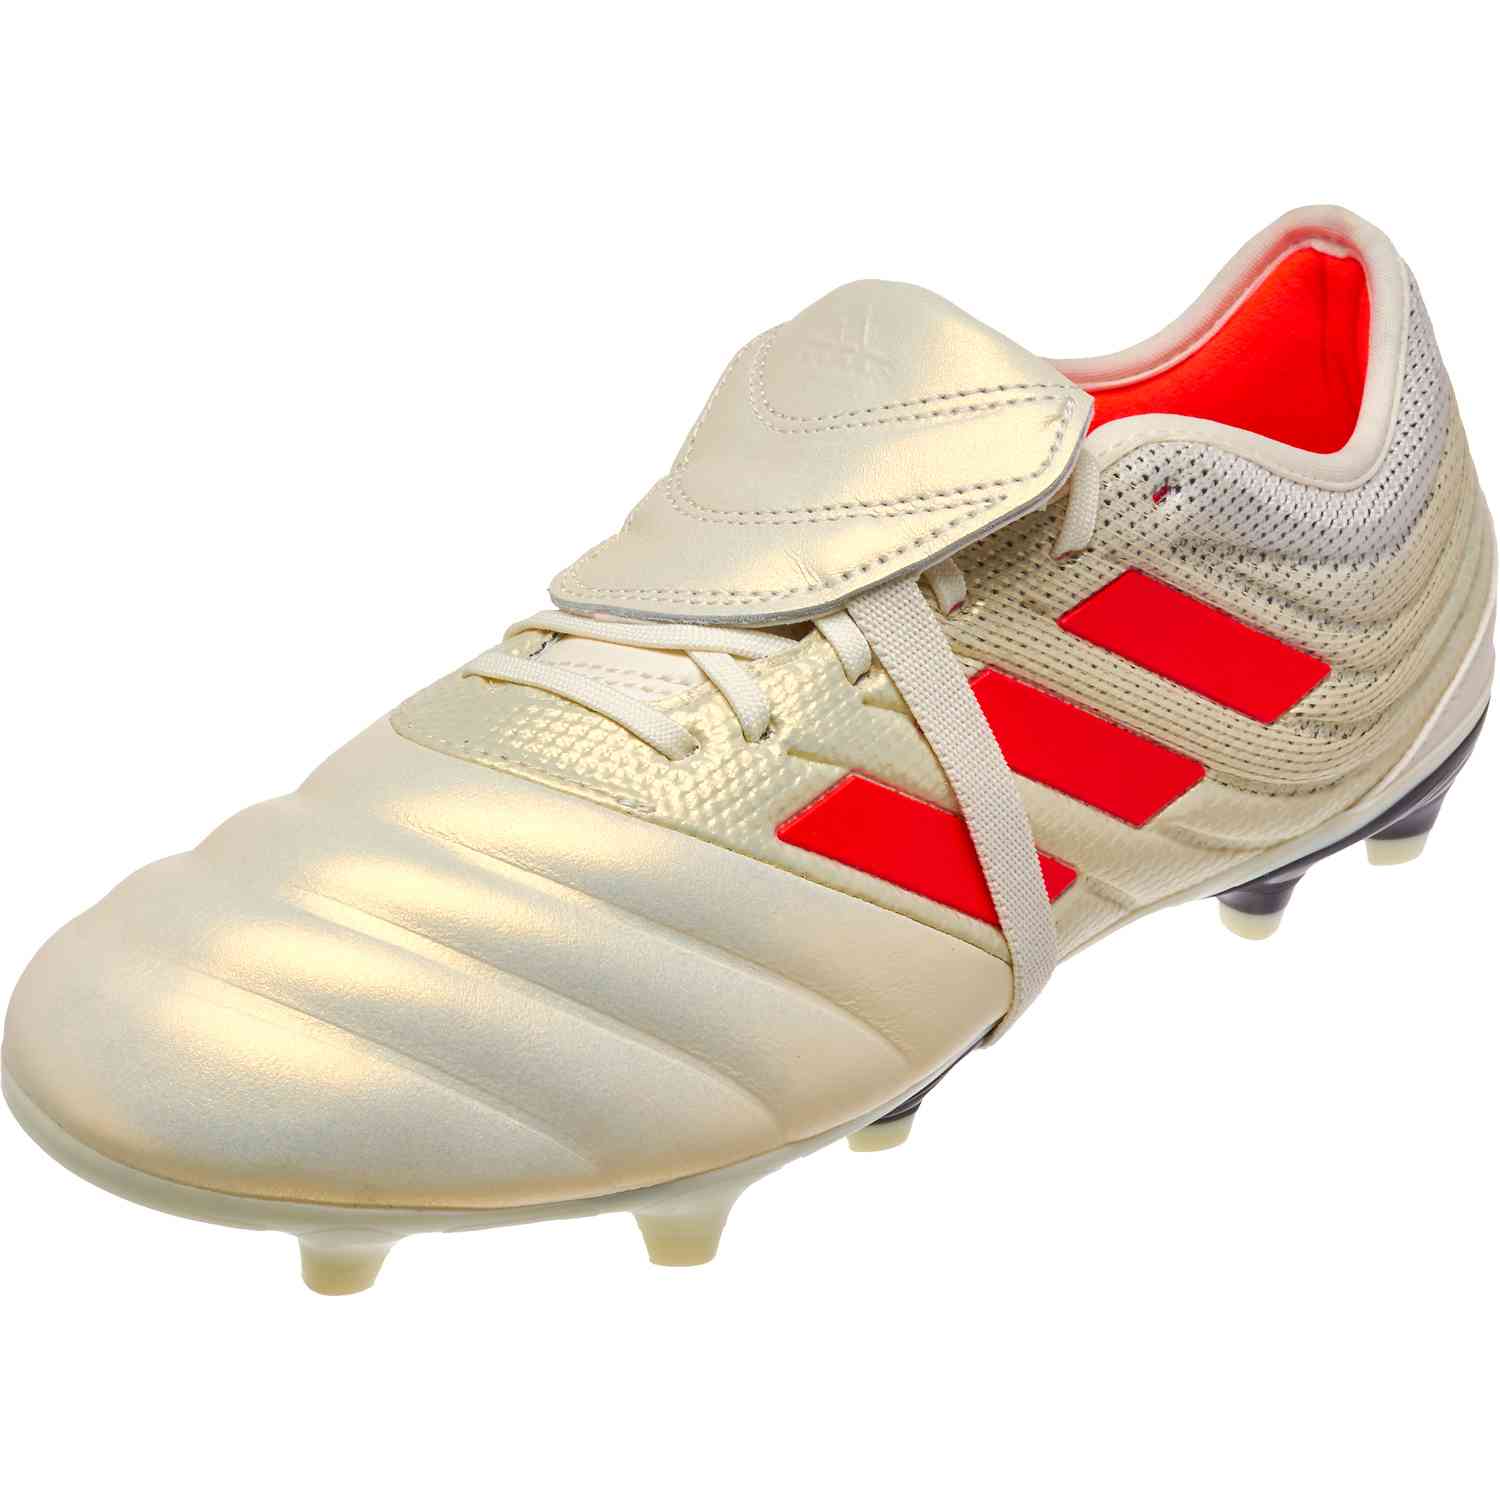 Surrender Conversely Snack adidas Copa Gloro 19.2 FG - Initiator Pack - Soccer Master